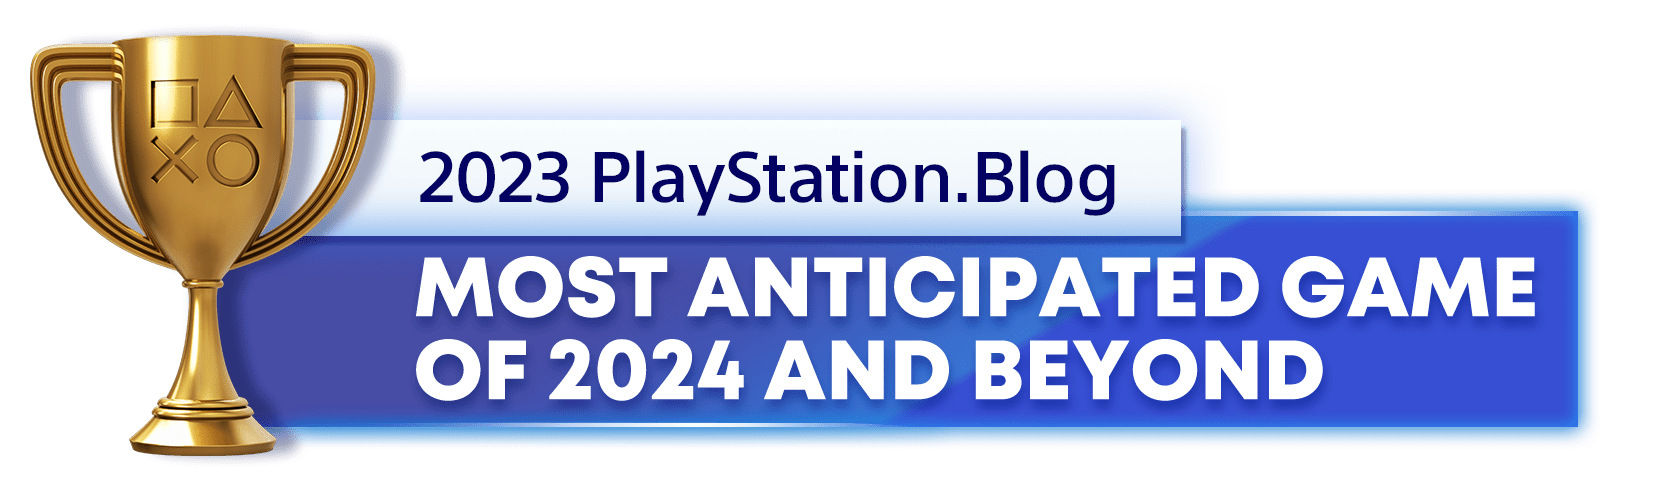  Gold Trophy for the 2023 PlayStation Blog Most Anticipated PlayStation Game of 2024 and Beyond Winner